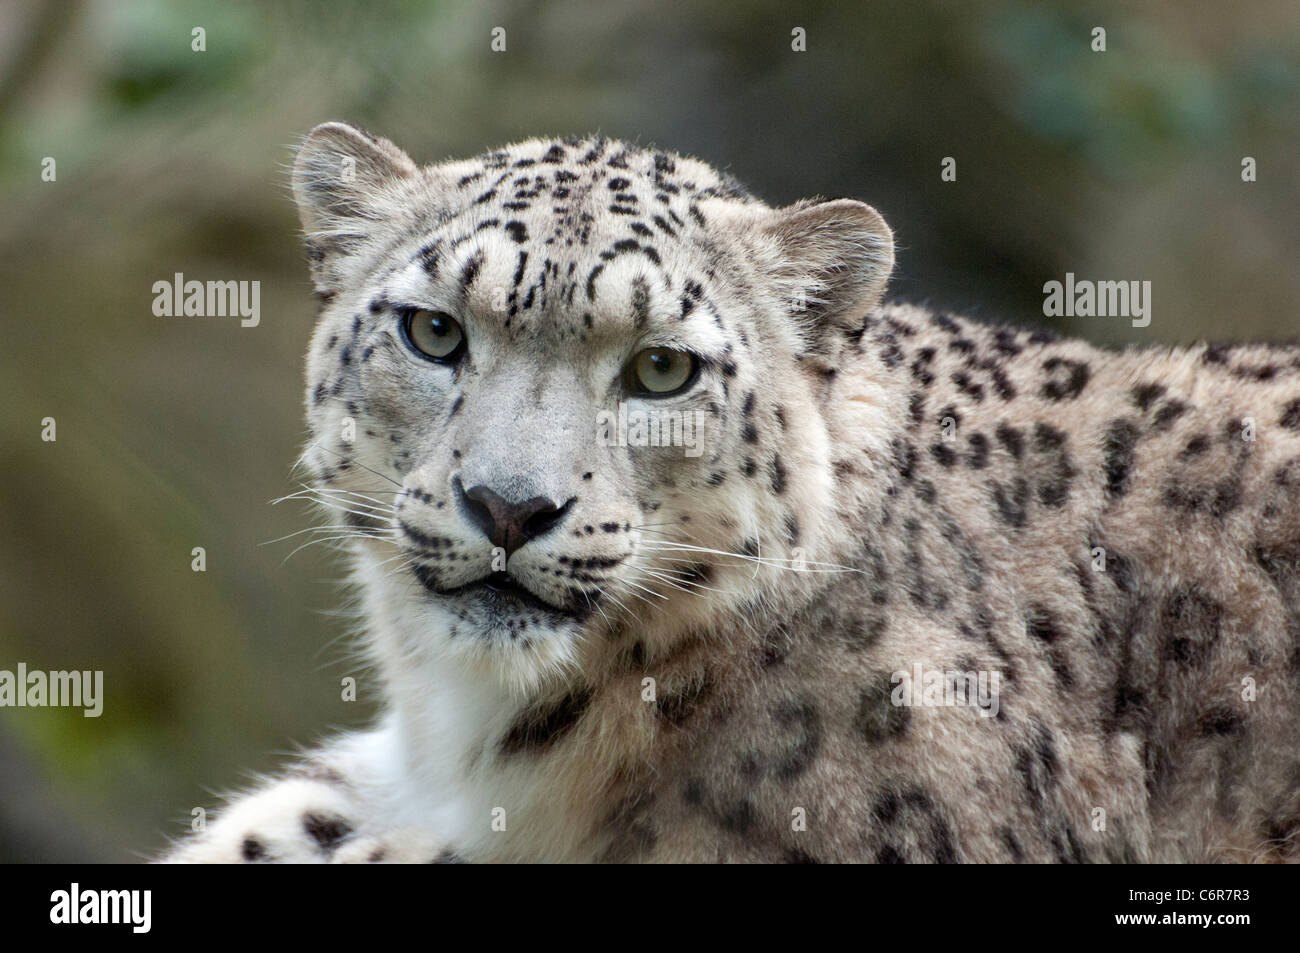 Snow Leopard femelle looking at camera Banque D'Images